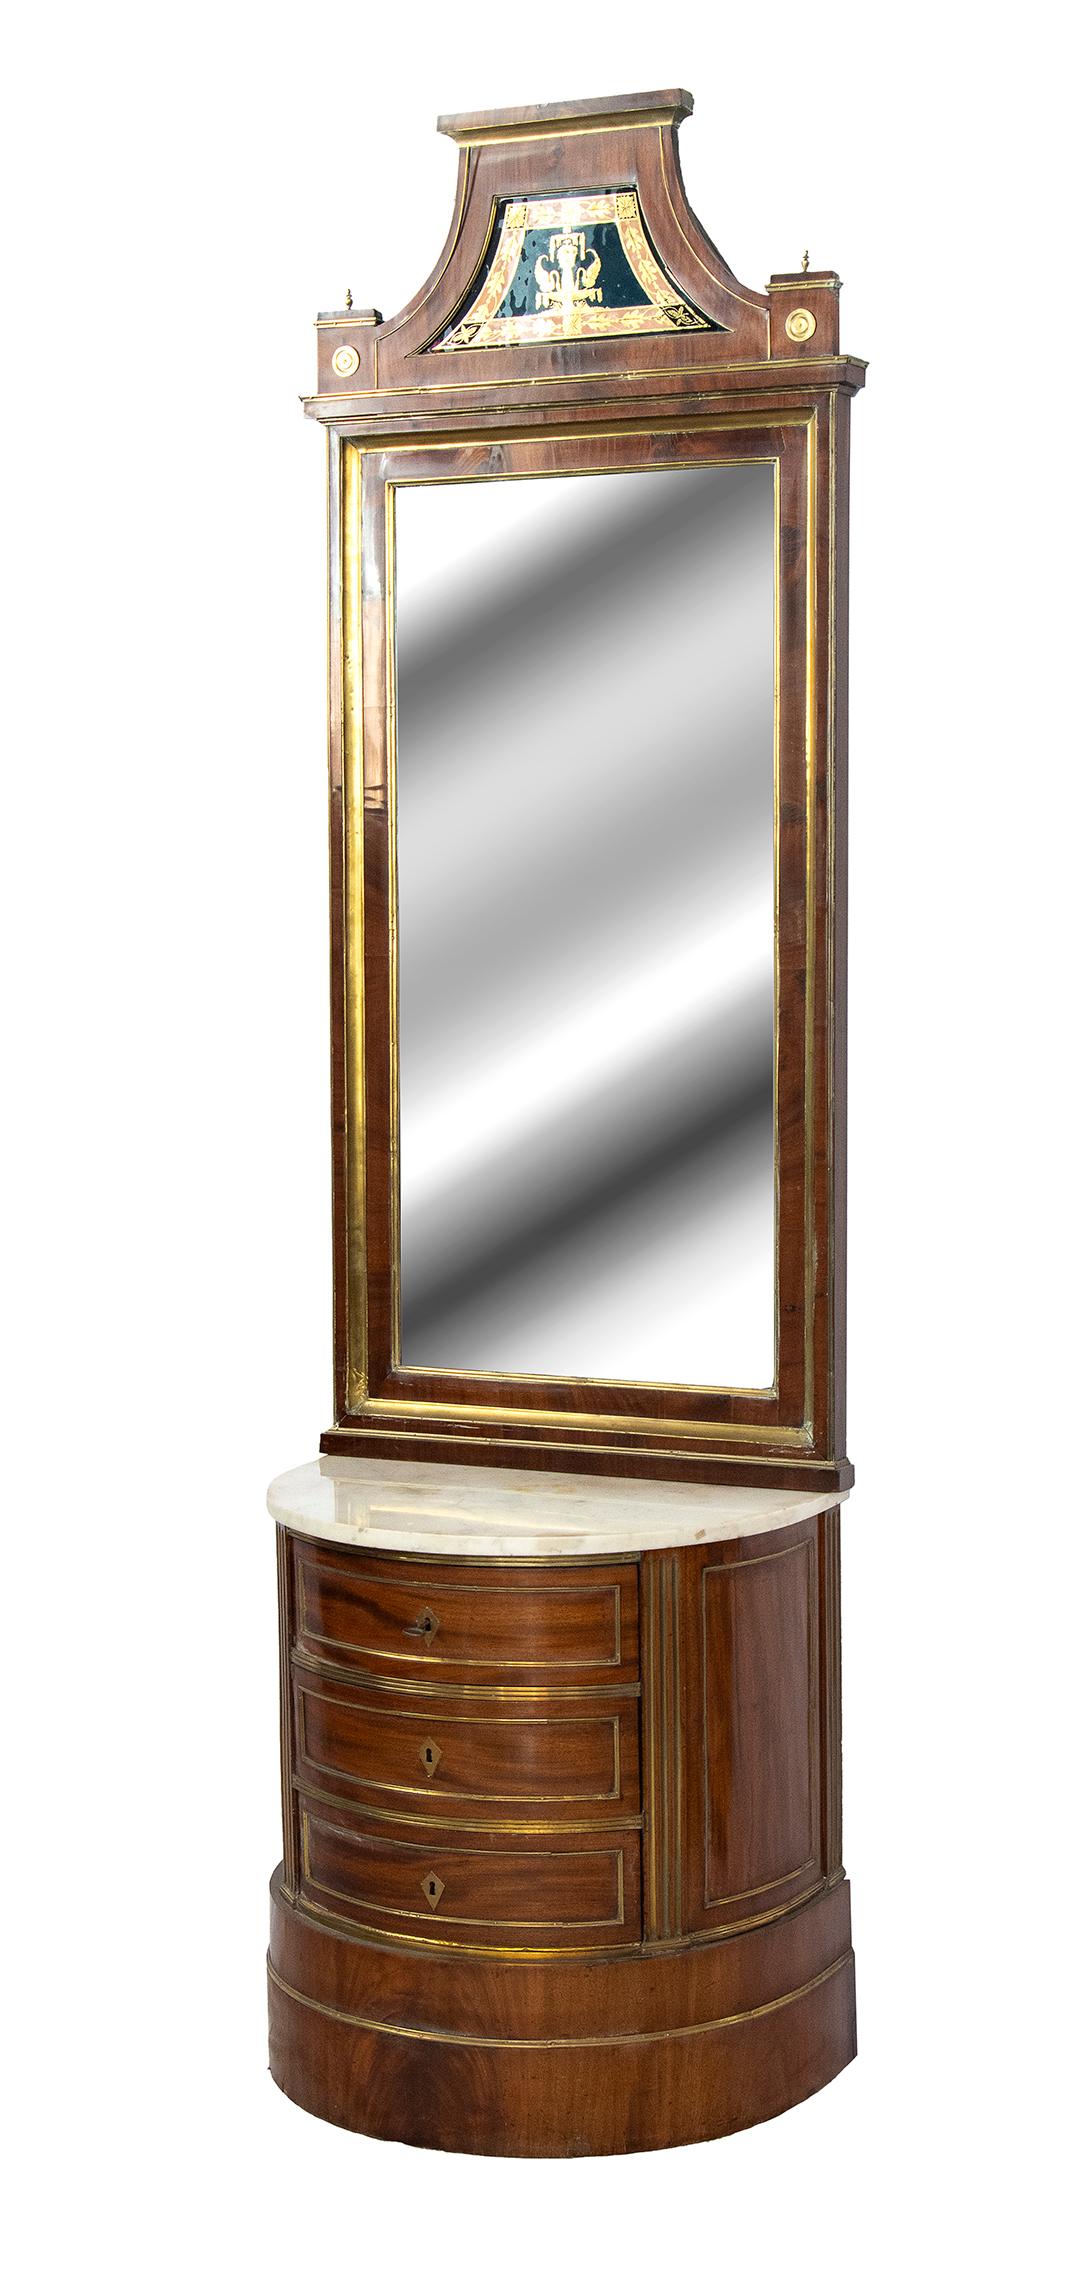 Biedermeier dresser cabinet with mirror - provenance Russia, early 19th century( c. 1820s)
Of crescent shape, with white Carrara marble top, three drawers, footless base. Gilt bronzes along the edges of the drawers and on the edge of the top.
Height